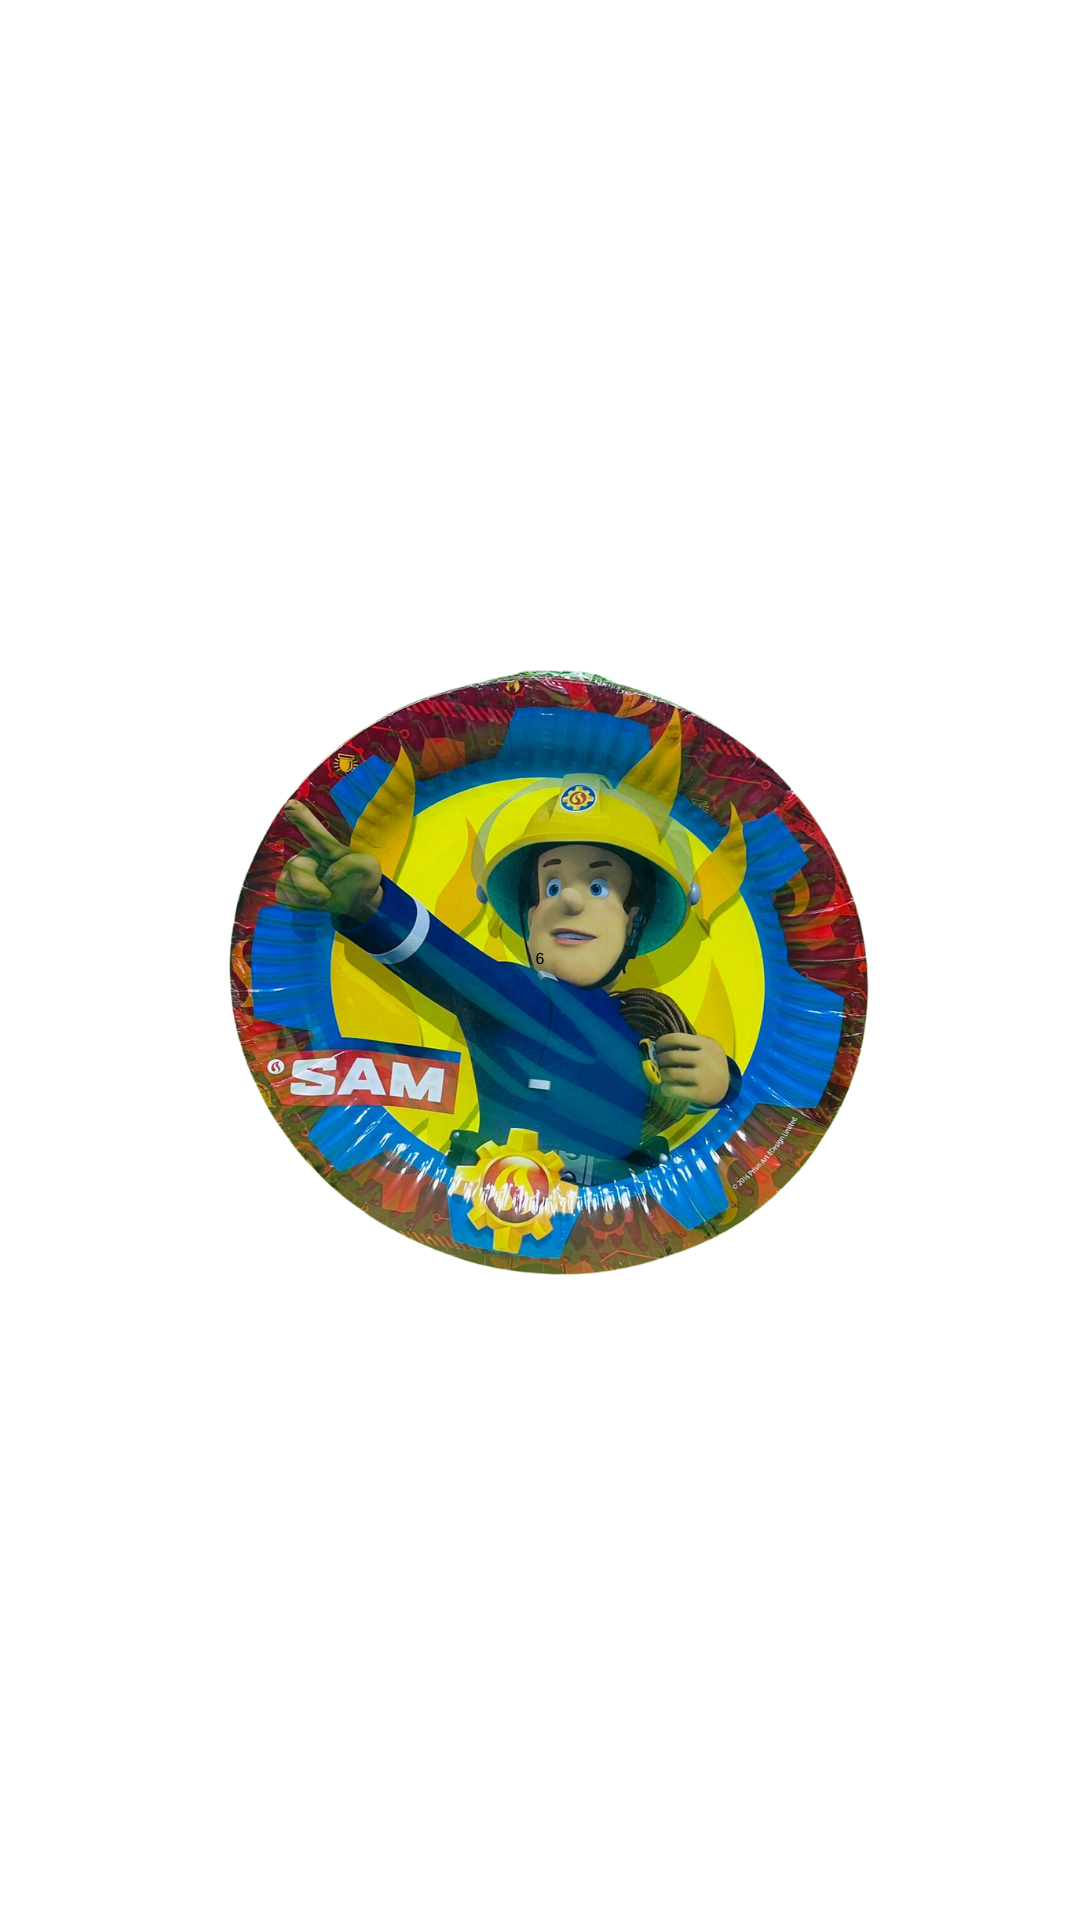 Fireman Sam Party Paper Plates - 8 Pack